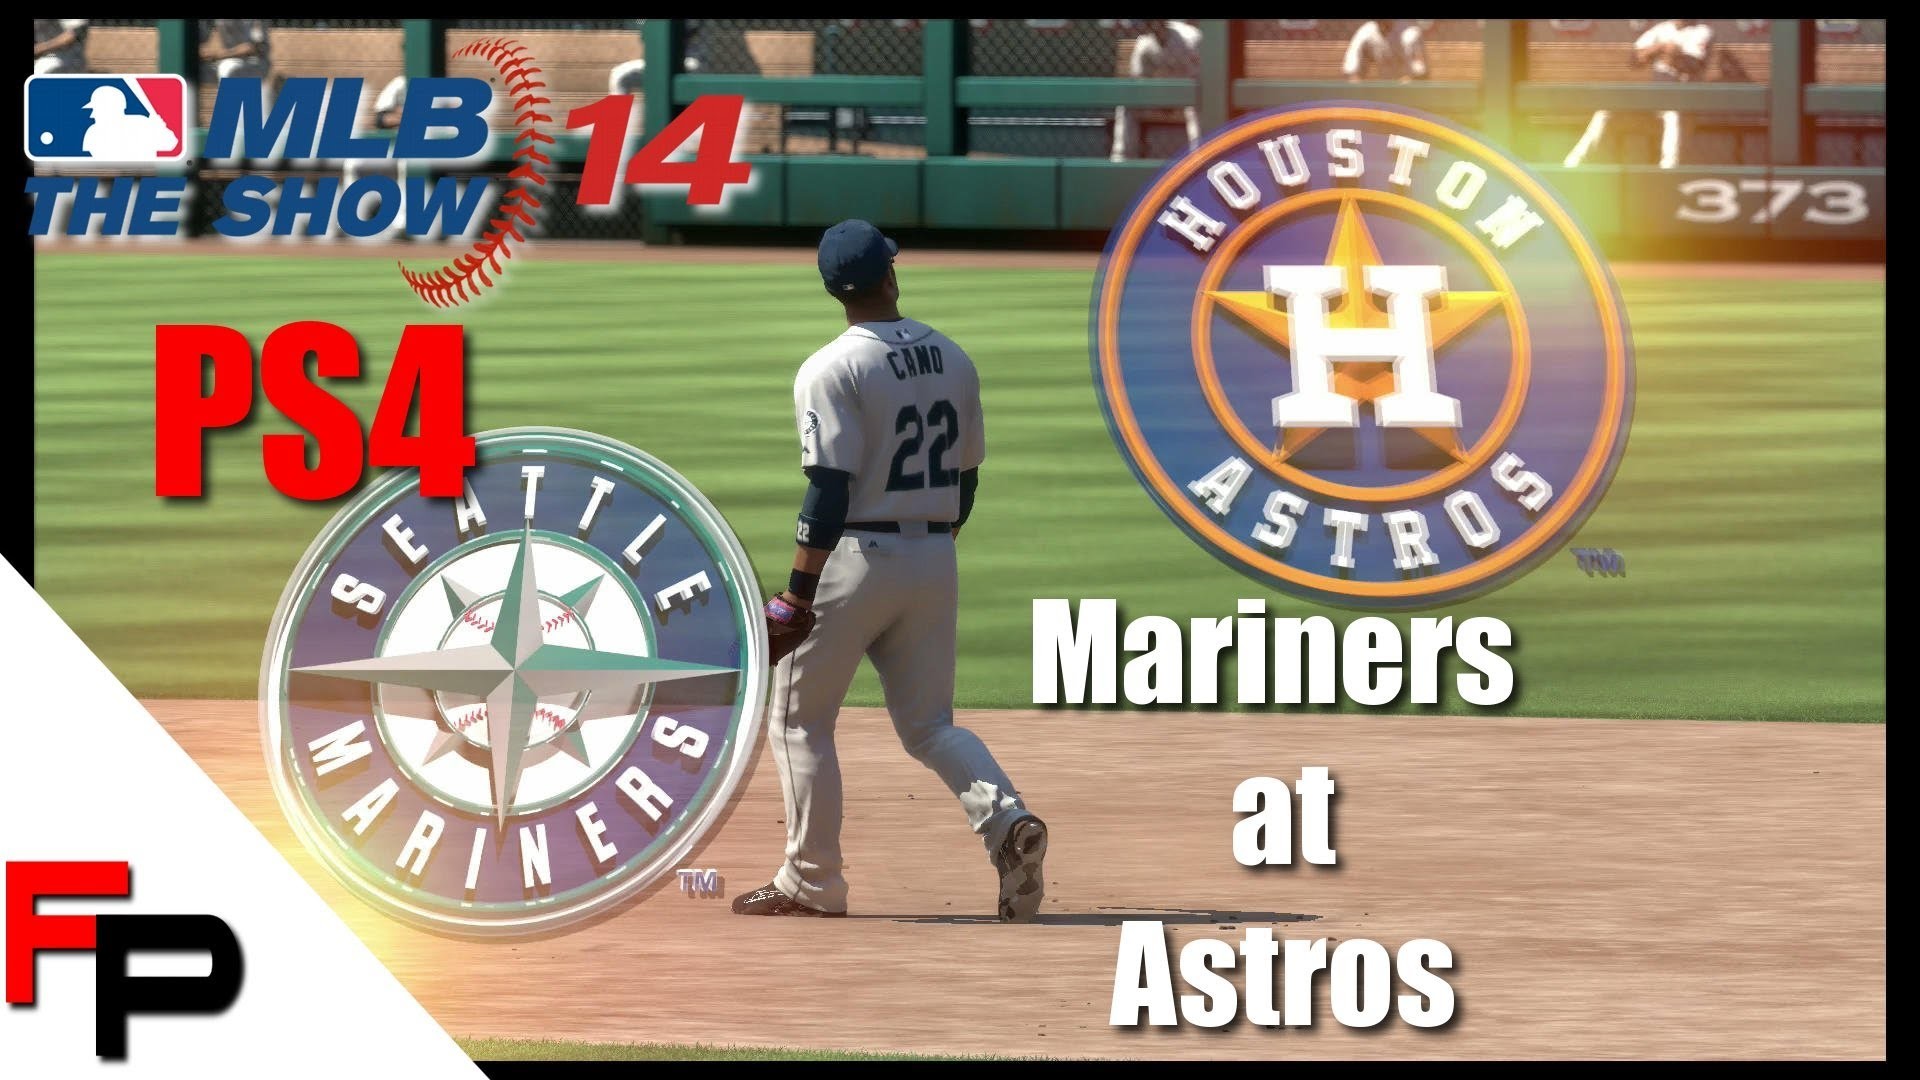 1920x1080 MLB 14 The Show - PS4 - Seattle Mariners at Houston Astros